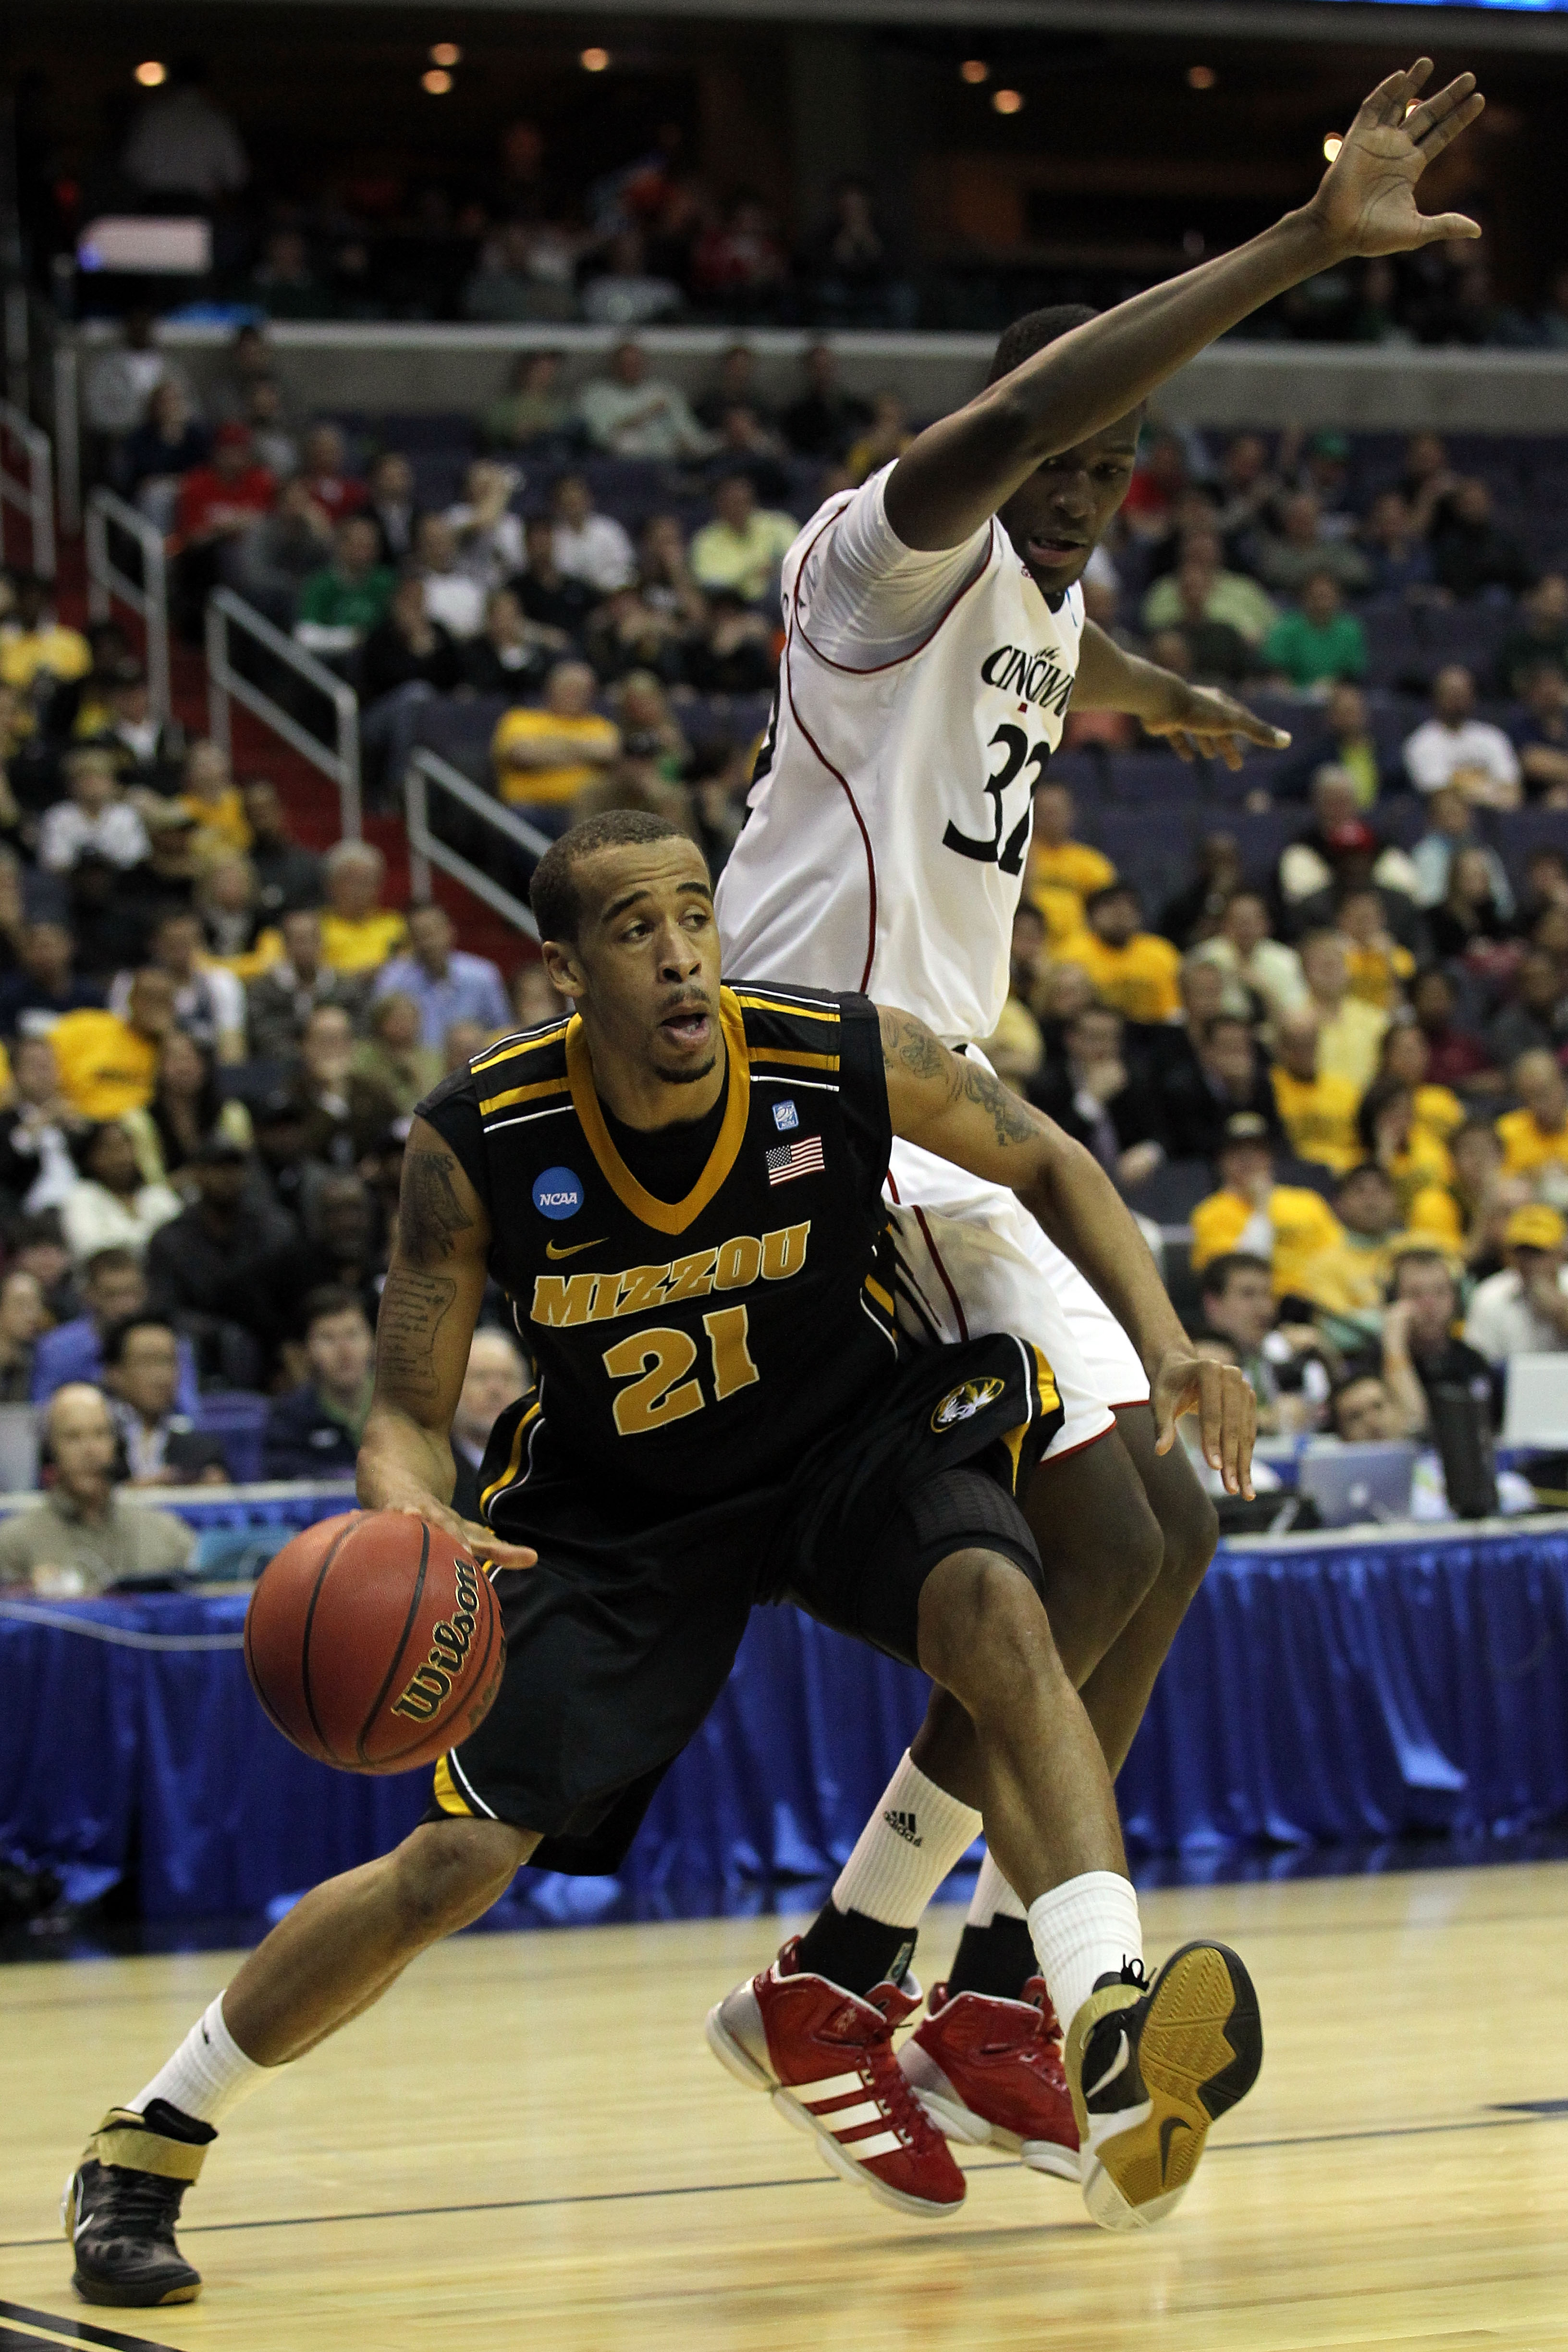 WASHINGTON - MARCH 17:  Laurence Bowers #21 of the Missouri Tigers drives the baseline past Ibrahima Thomas #32 of the Cincinnati Bearcats during the second round of the 2011 NCAA men's basketball tournament at the Verizon Center on March 17, 2011 in Wash